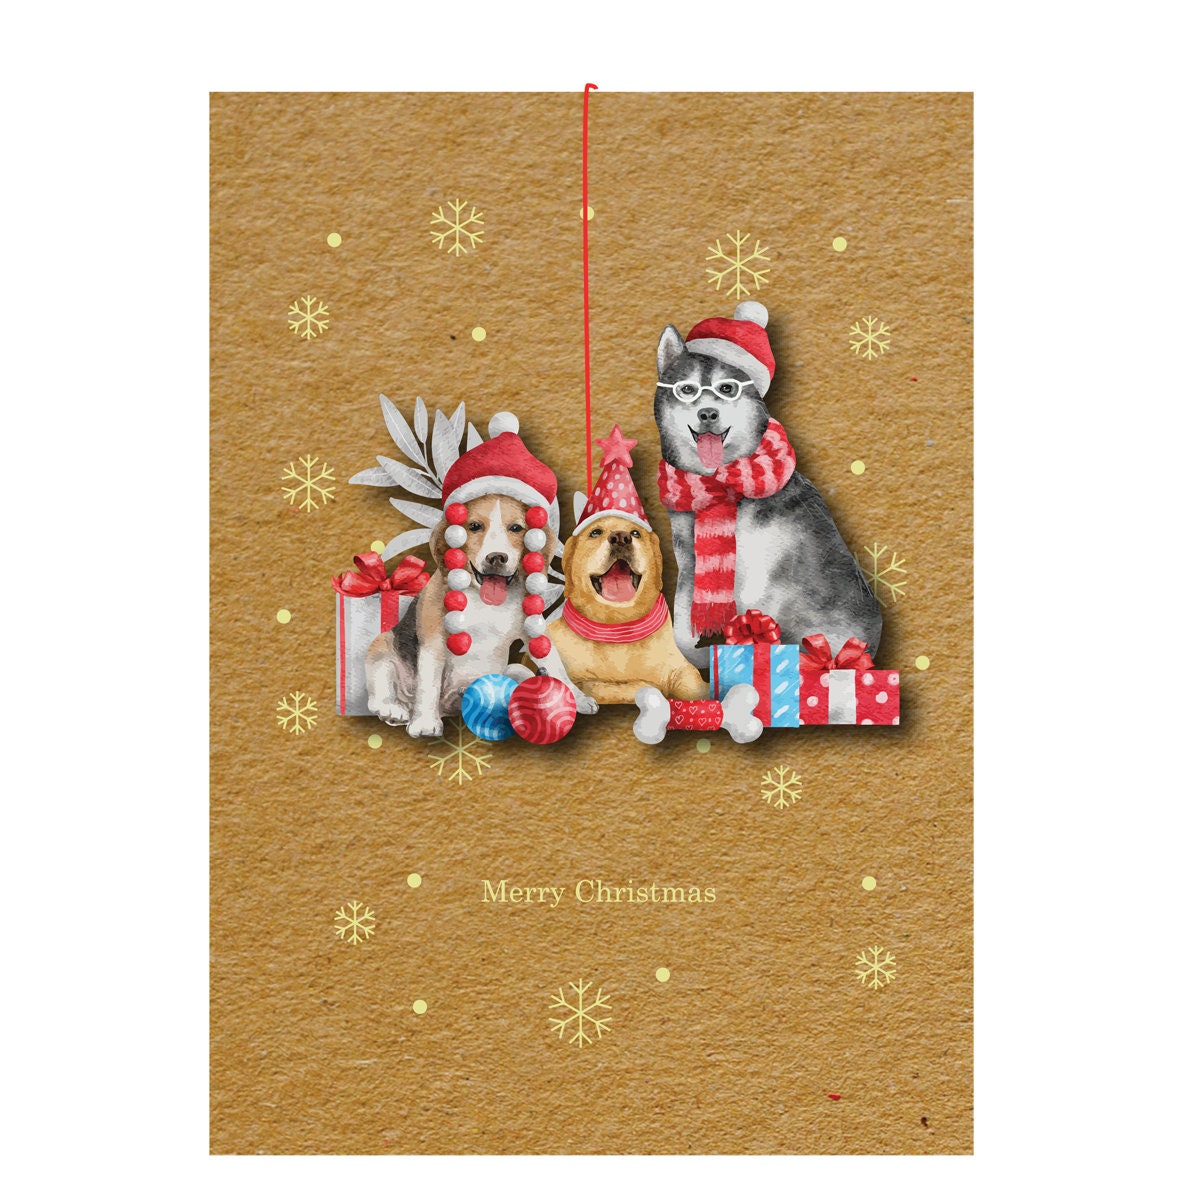 3D Pop Up Christmas Decoration Card, Card For Dog Lover, Dog Bauble Card, Pop up Card, Cards For Dog Lovers, Pop Up cards, 3D Design